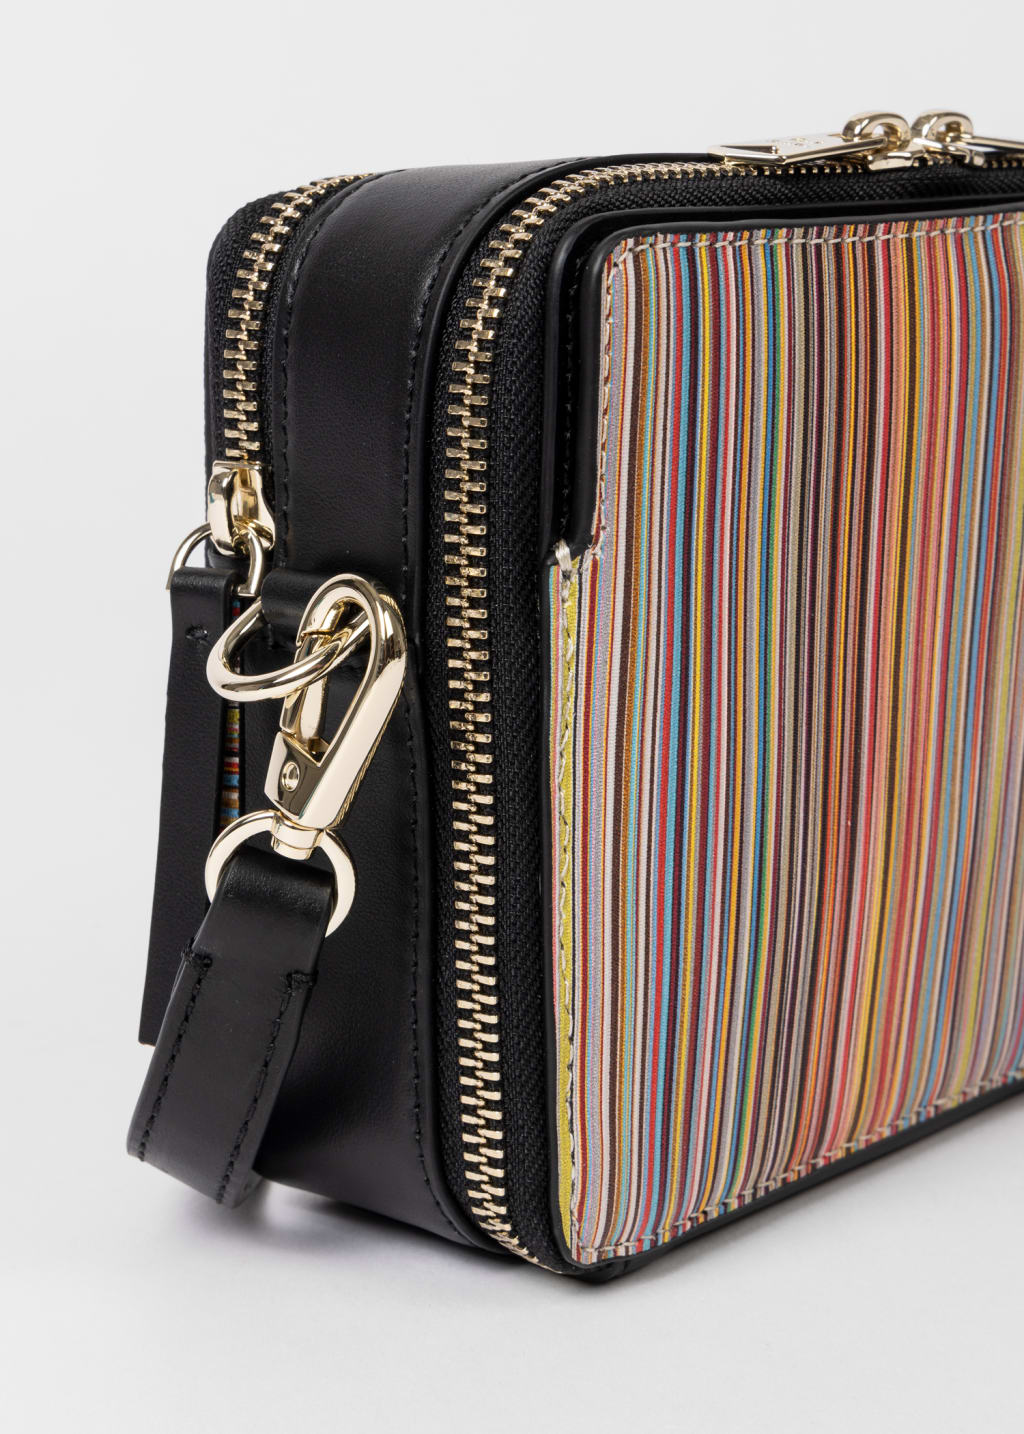 Product view - Leather 'Signature Stripe' Cross Body Bag by Paul Smith